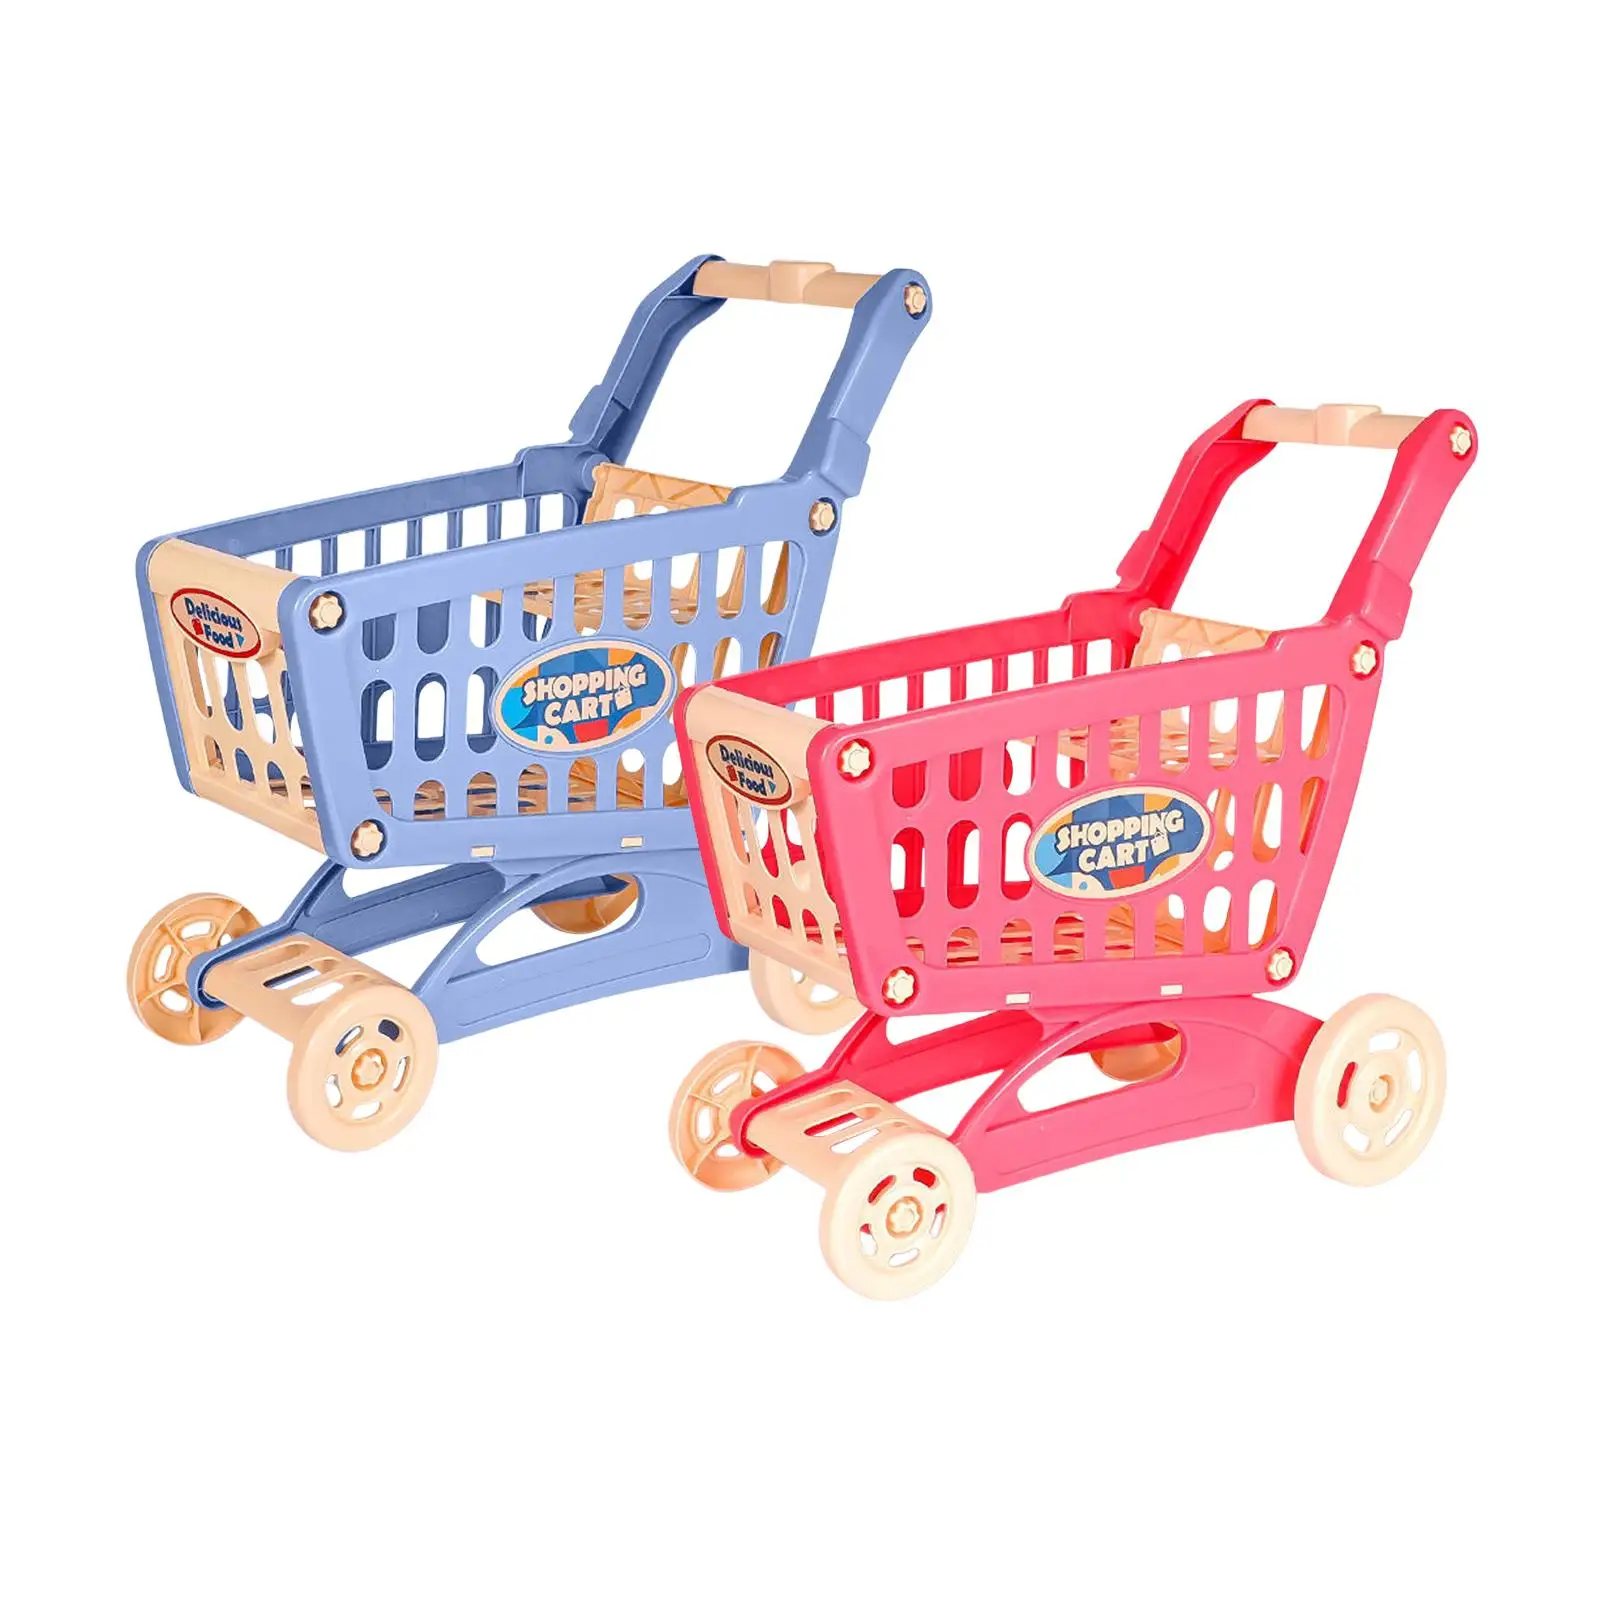 Small Supermarket Handcart Storage Toy Mart Shopping Cart for Ages 3 and up Toddler Baby Pretend Play Set Party Favors